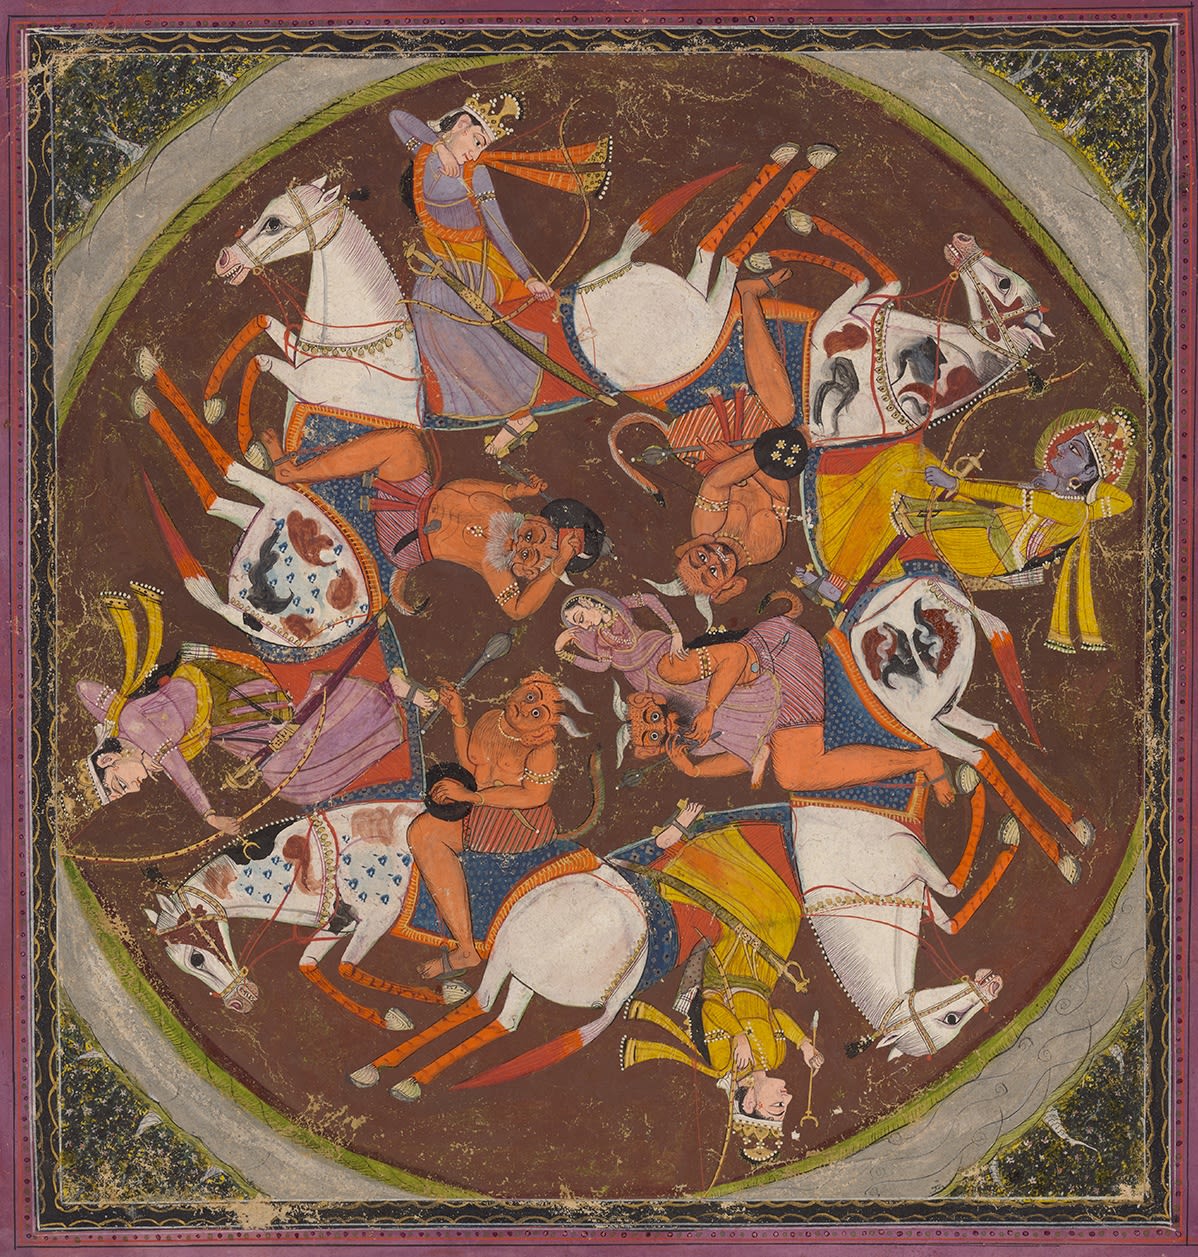 Rama and his brothers ride on horseback in a circle shooting at demons trying to abduct Sita, Sikh, Lahore or Patiala, c. 1850